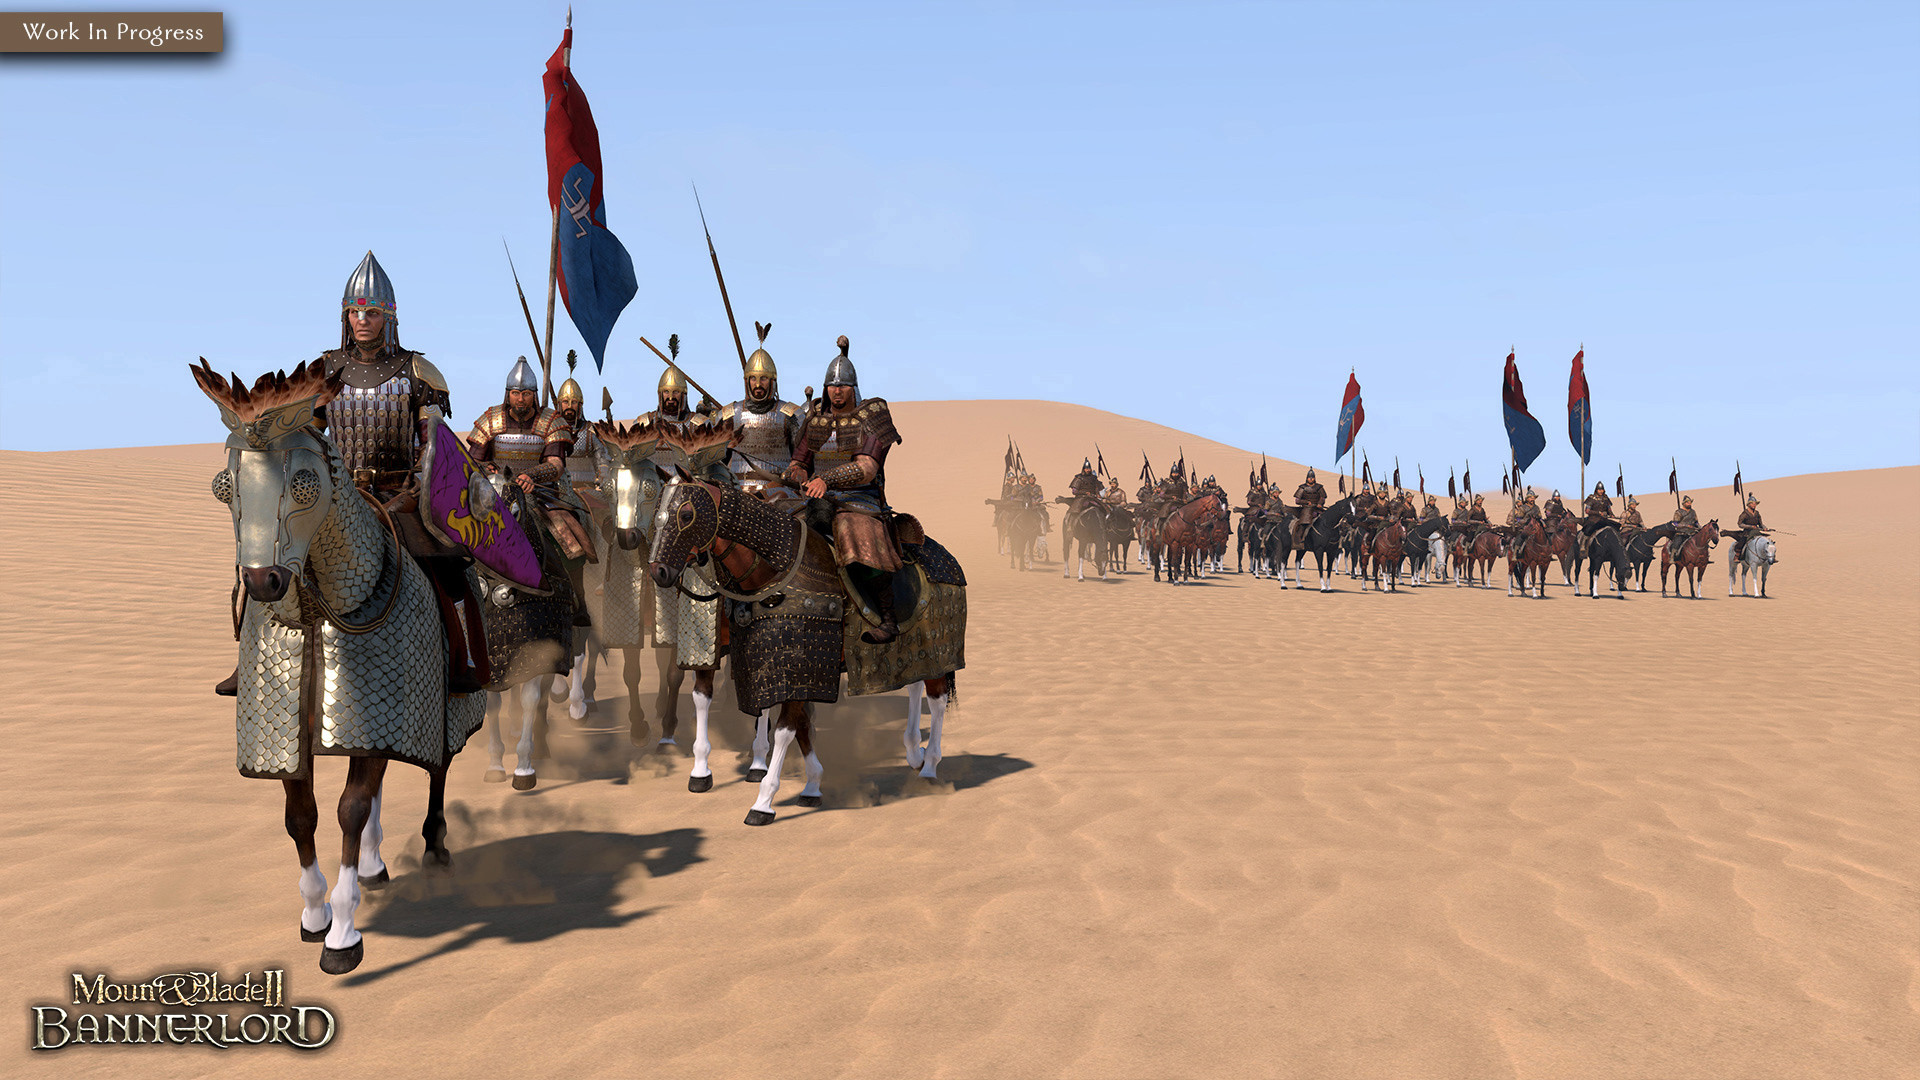 Mount & Blade 2: Banner Lord